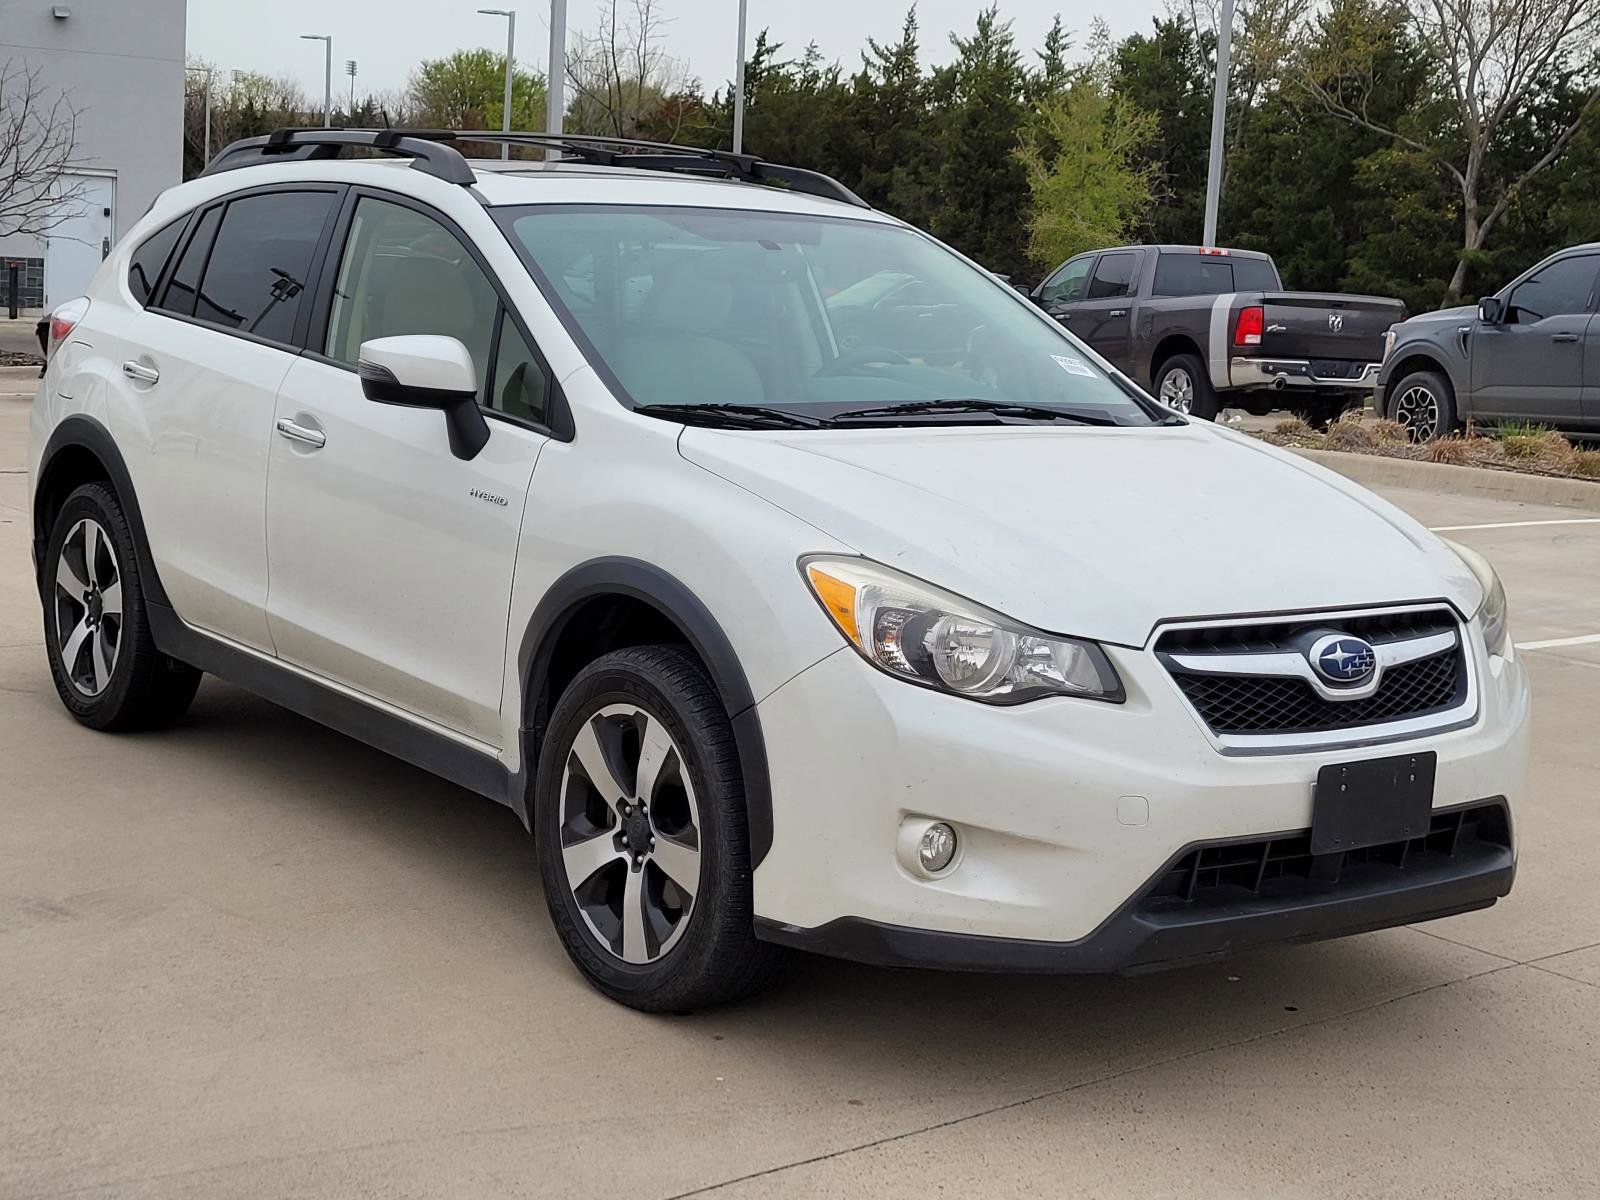 Pre-Owned 2015 Subaru XV Crosstrek Hybrid Touring Sport Utility in Cerritos  #FH296705 | Norm Reeves Auto Group